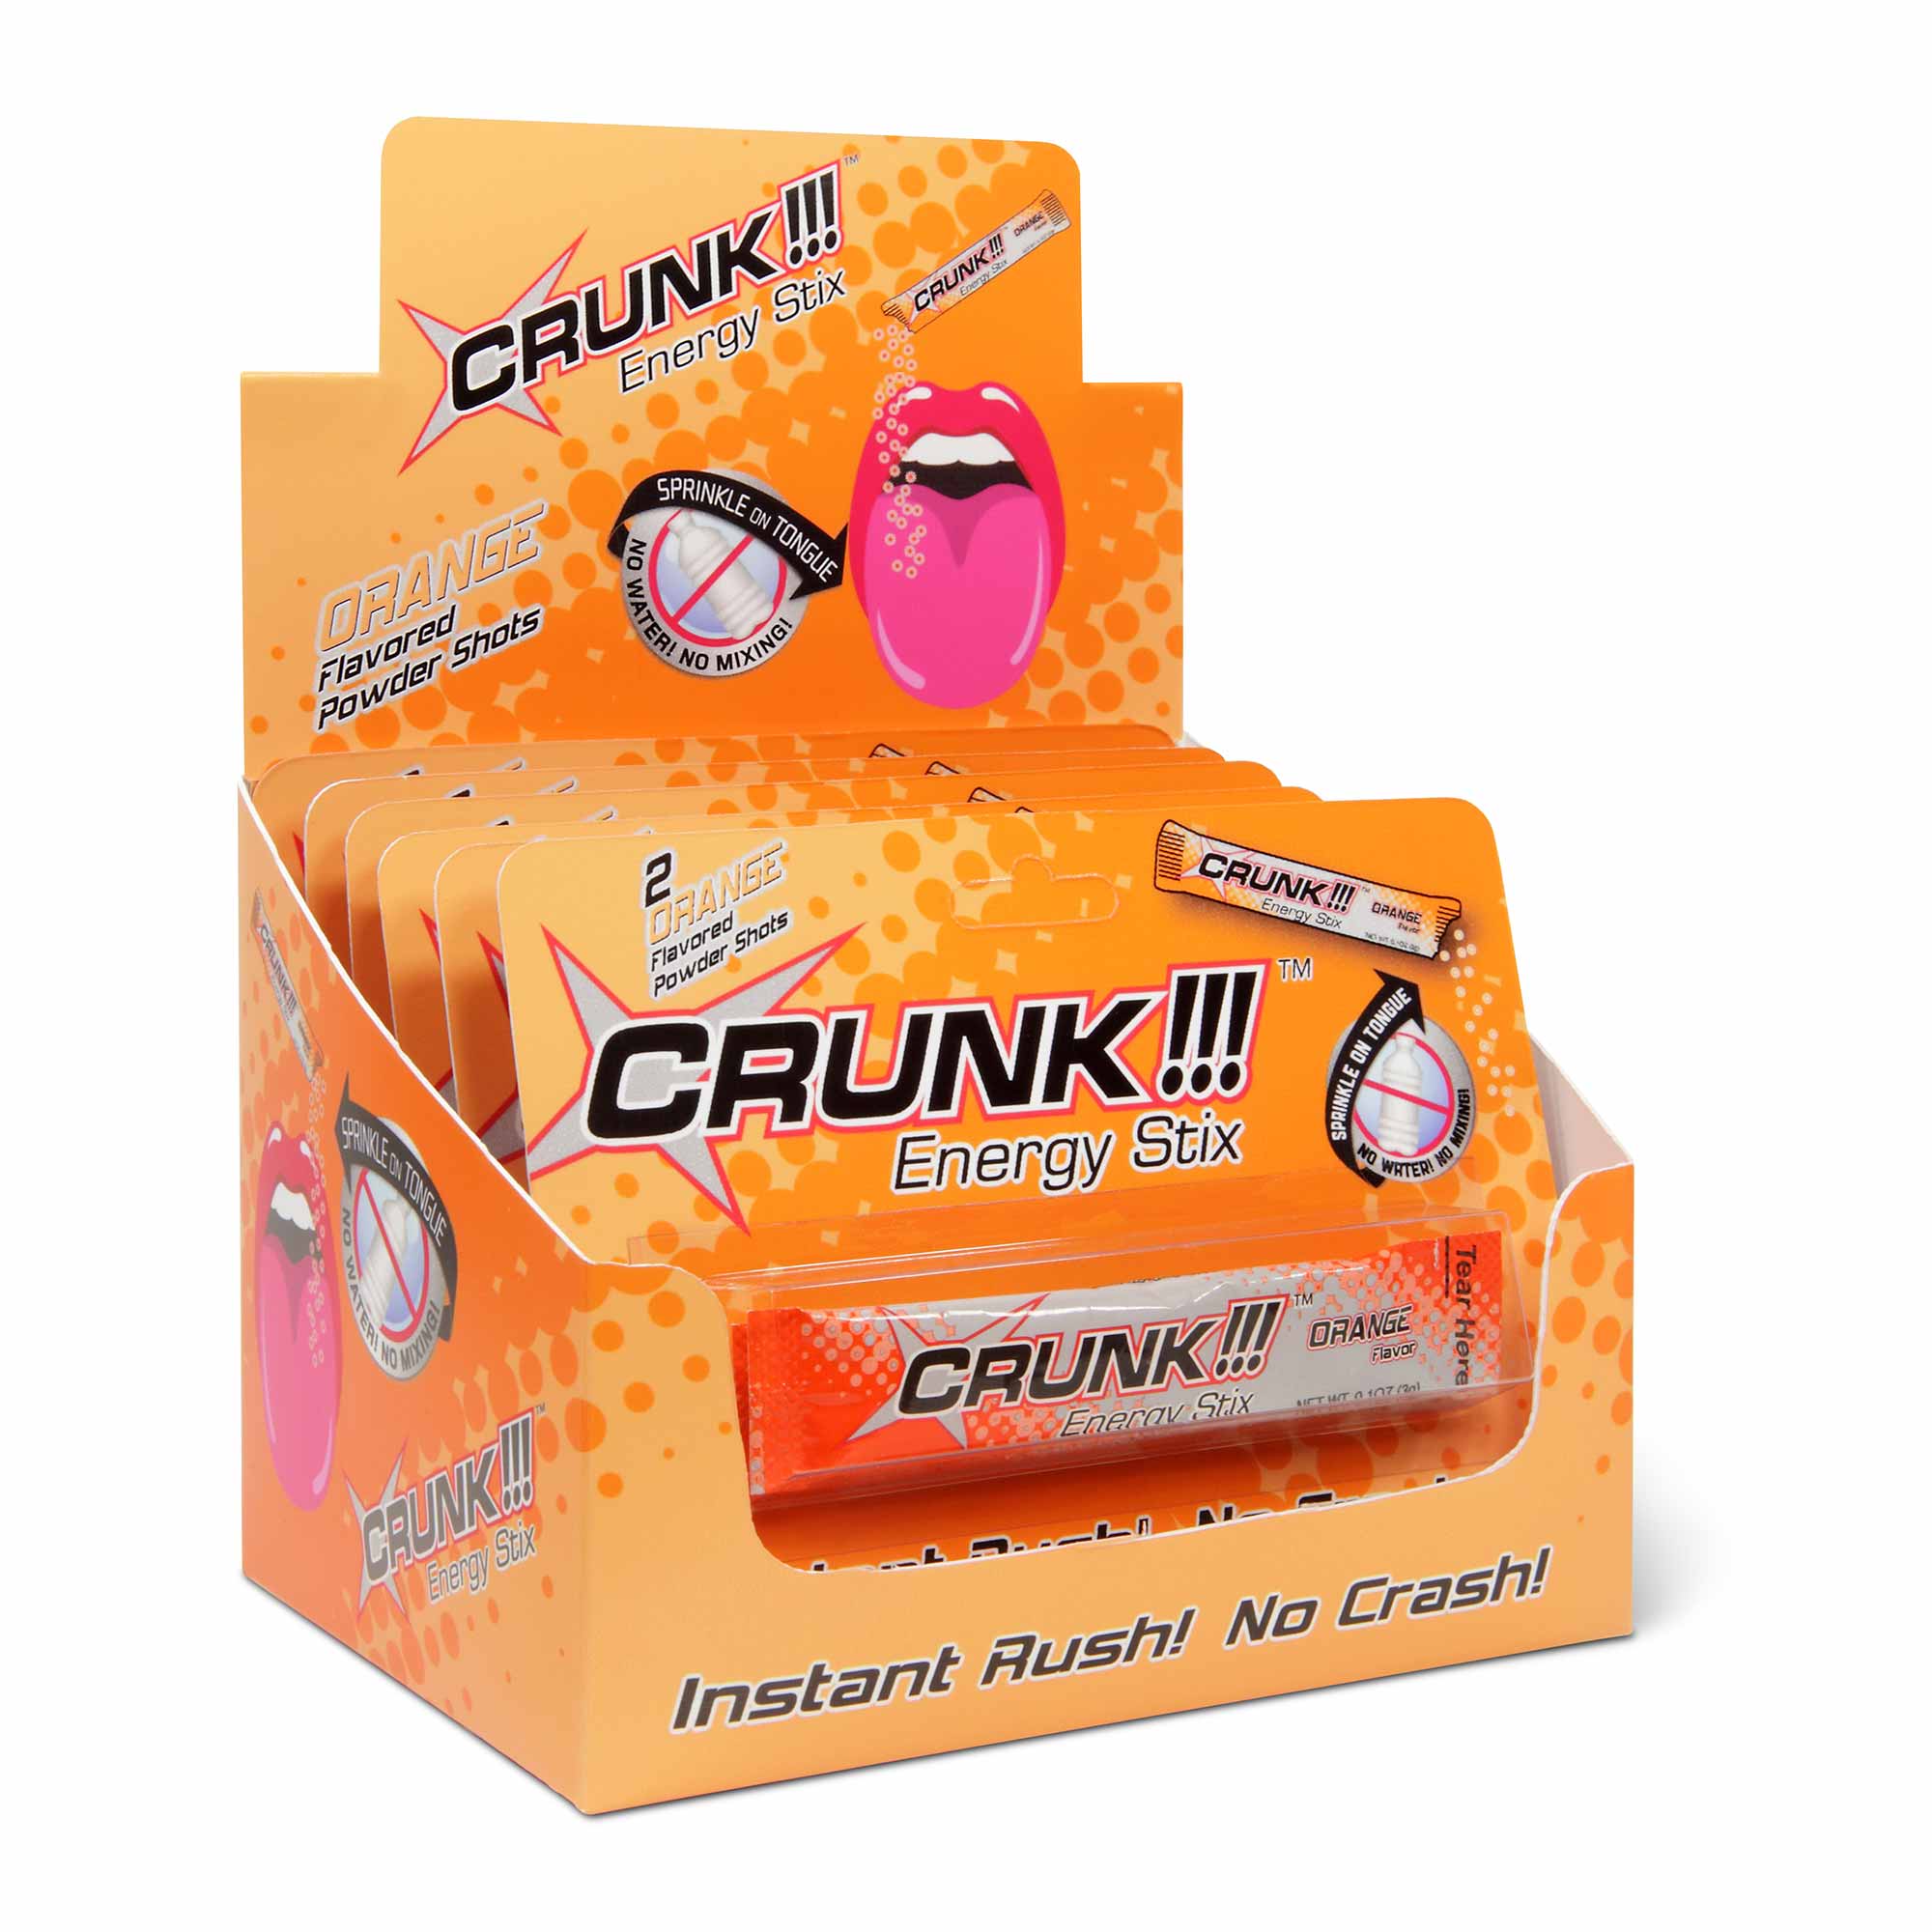 Crunk product photography